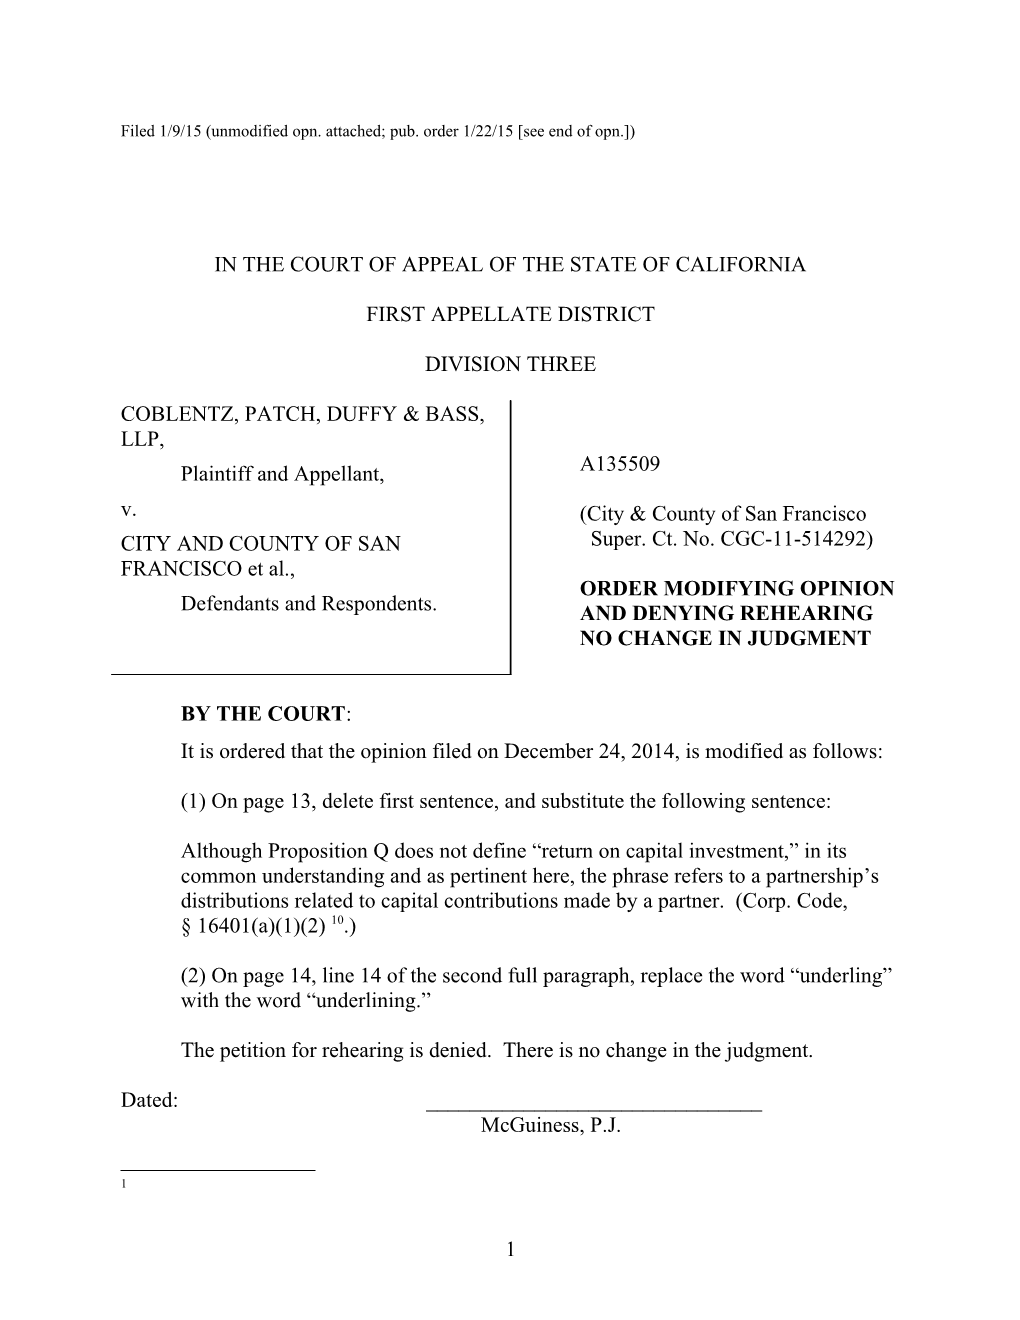 Filed 1/9/15 (Unmodified Opn. Attached; Pub. Order 1/22/15 See End of Opn. )